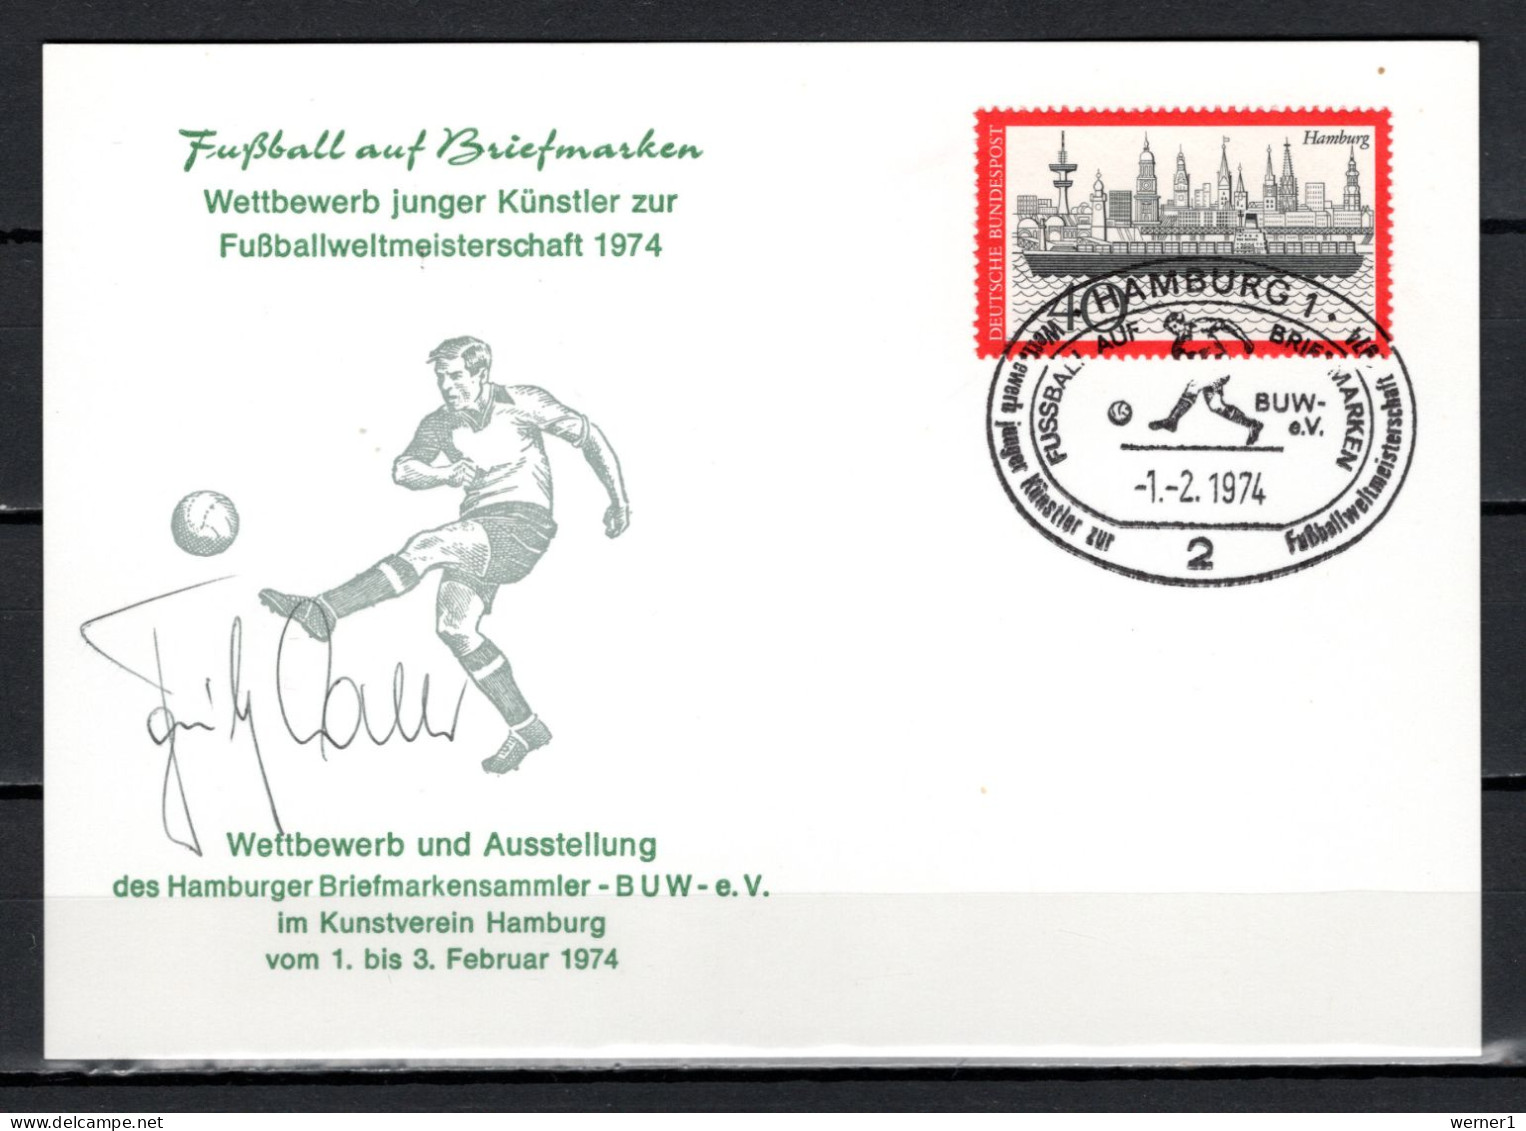 Germany 1974 Football Soccer World Cup Autograph Postcard With Original Signature Of Fritz Walter - 1974 – West Germany